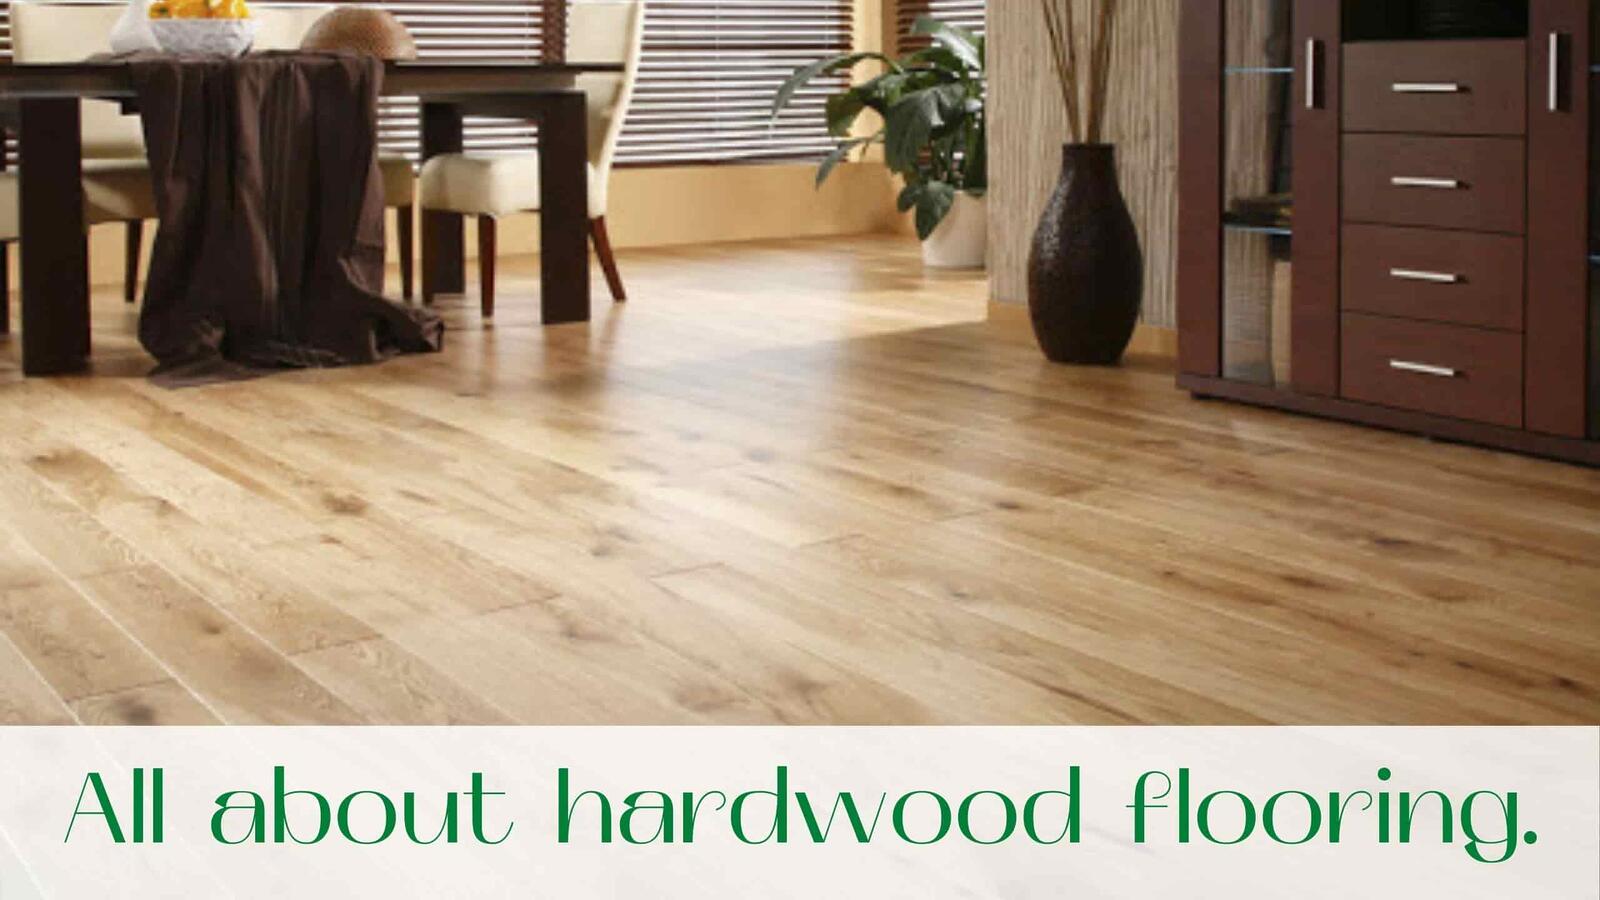 image-All-about-hardwood-flooring